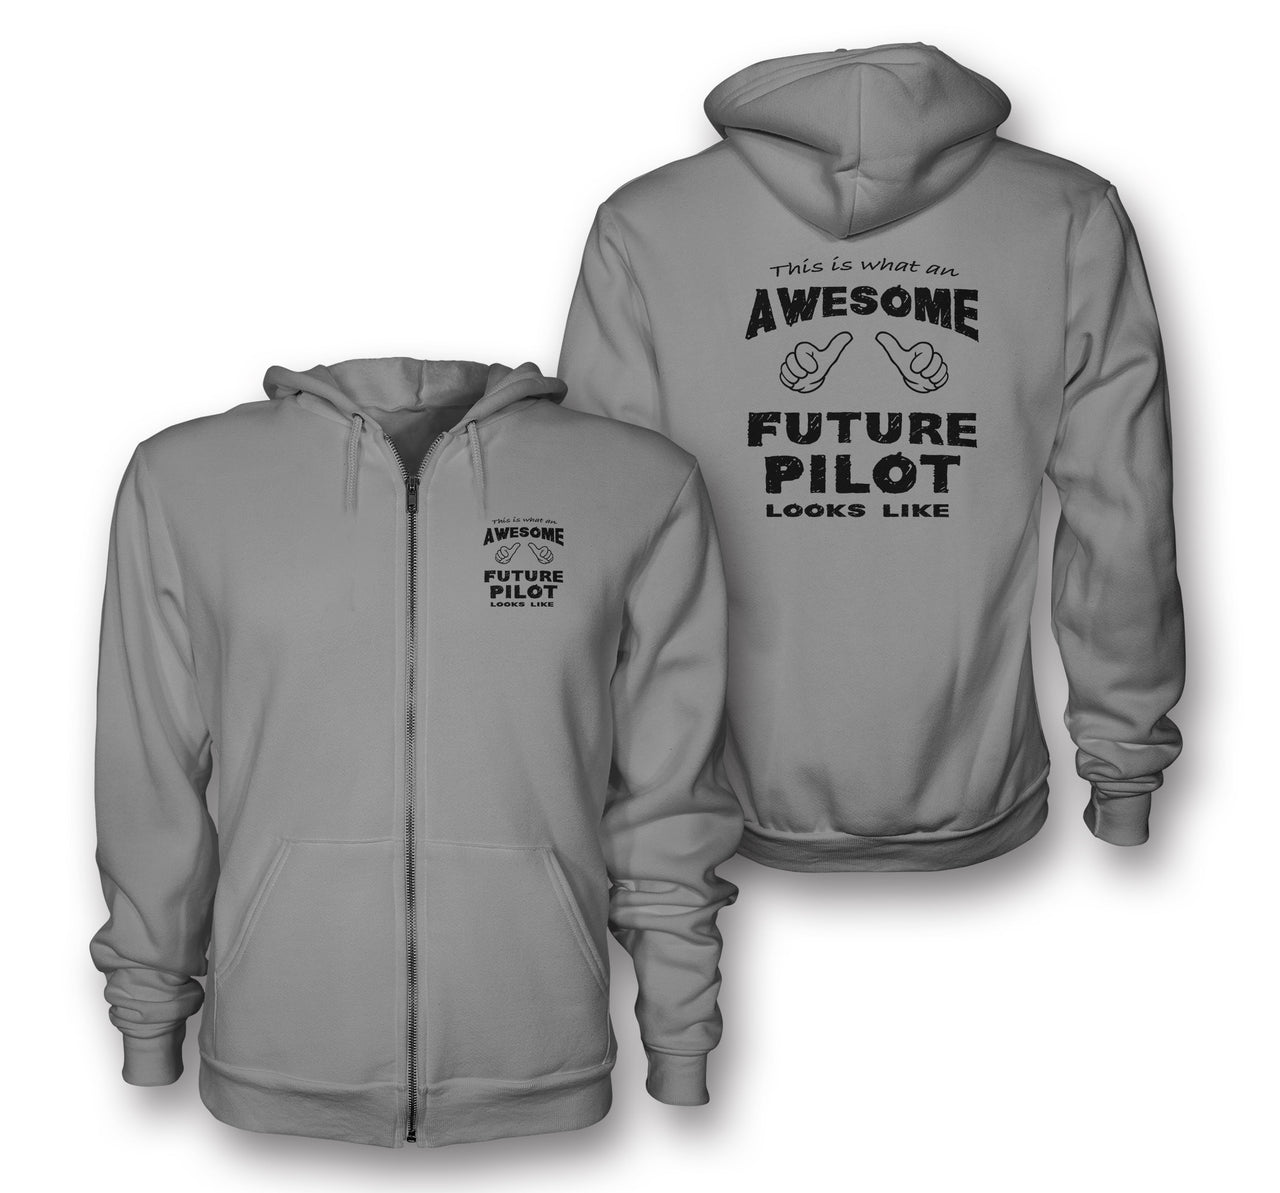 This is What an Awesome Future Pilot Look Like Designed Zipped Hoodies